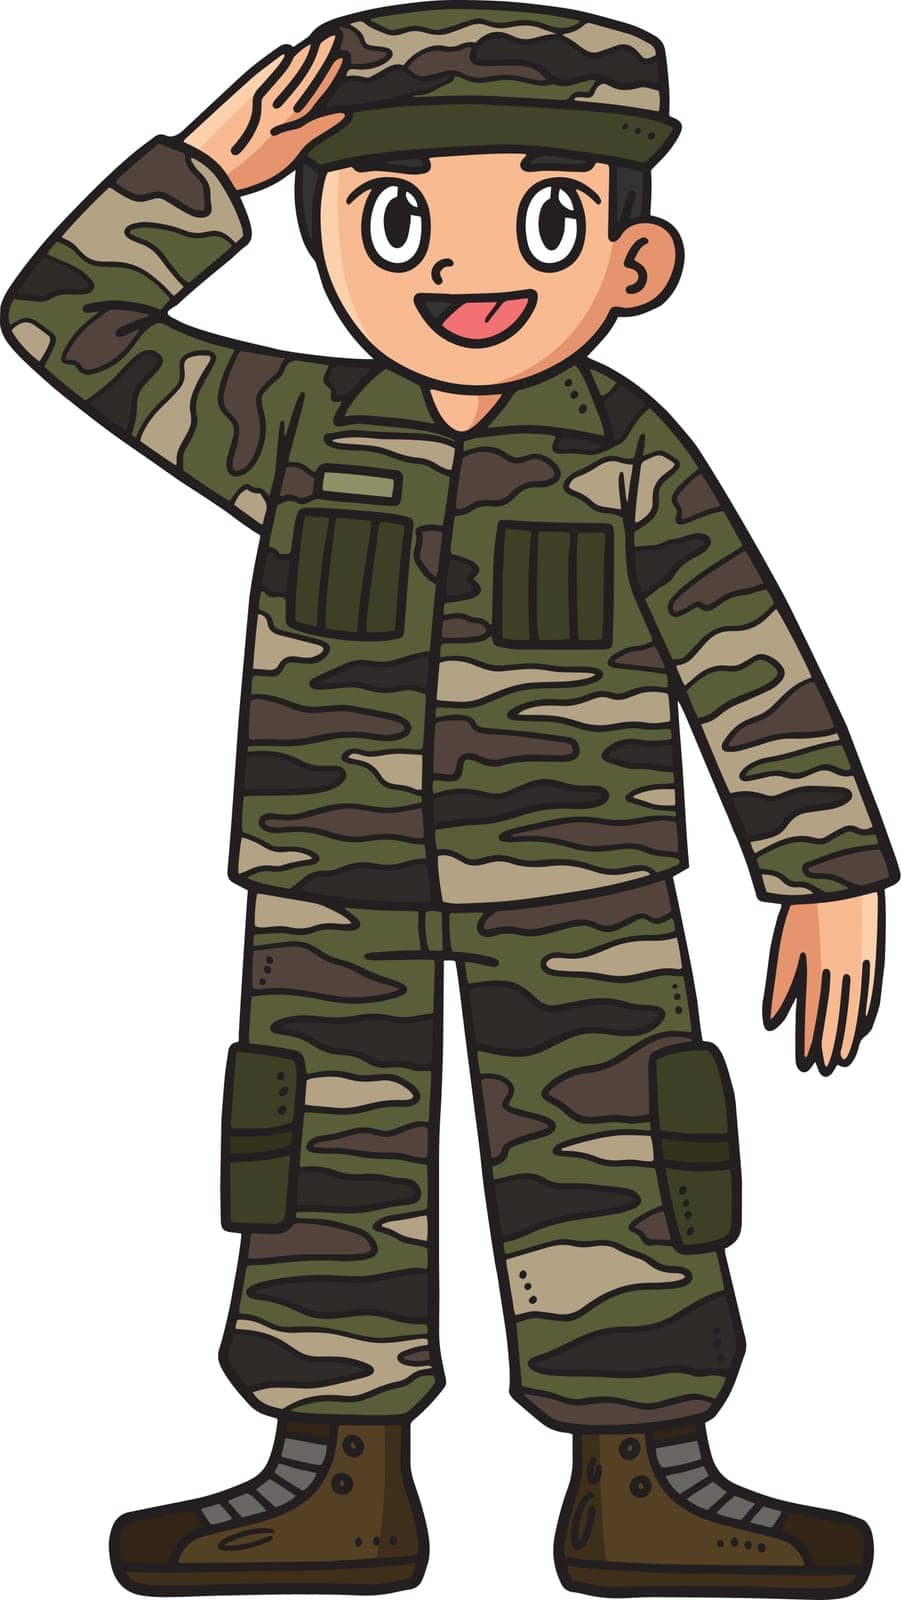 This cartoon clipart shows a Saluting Soldier illustration.